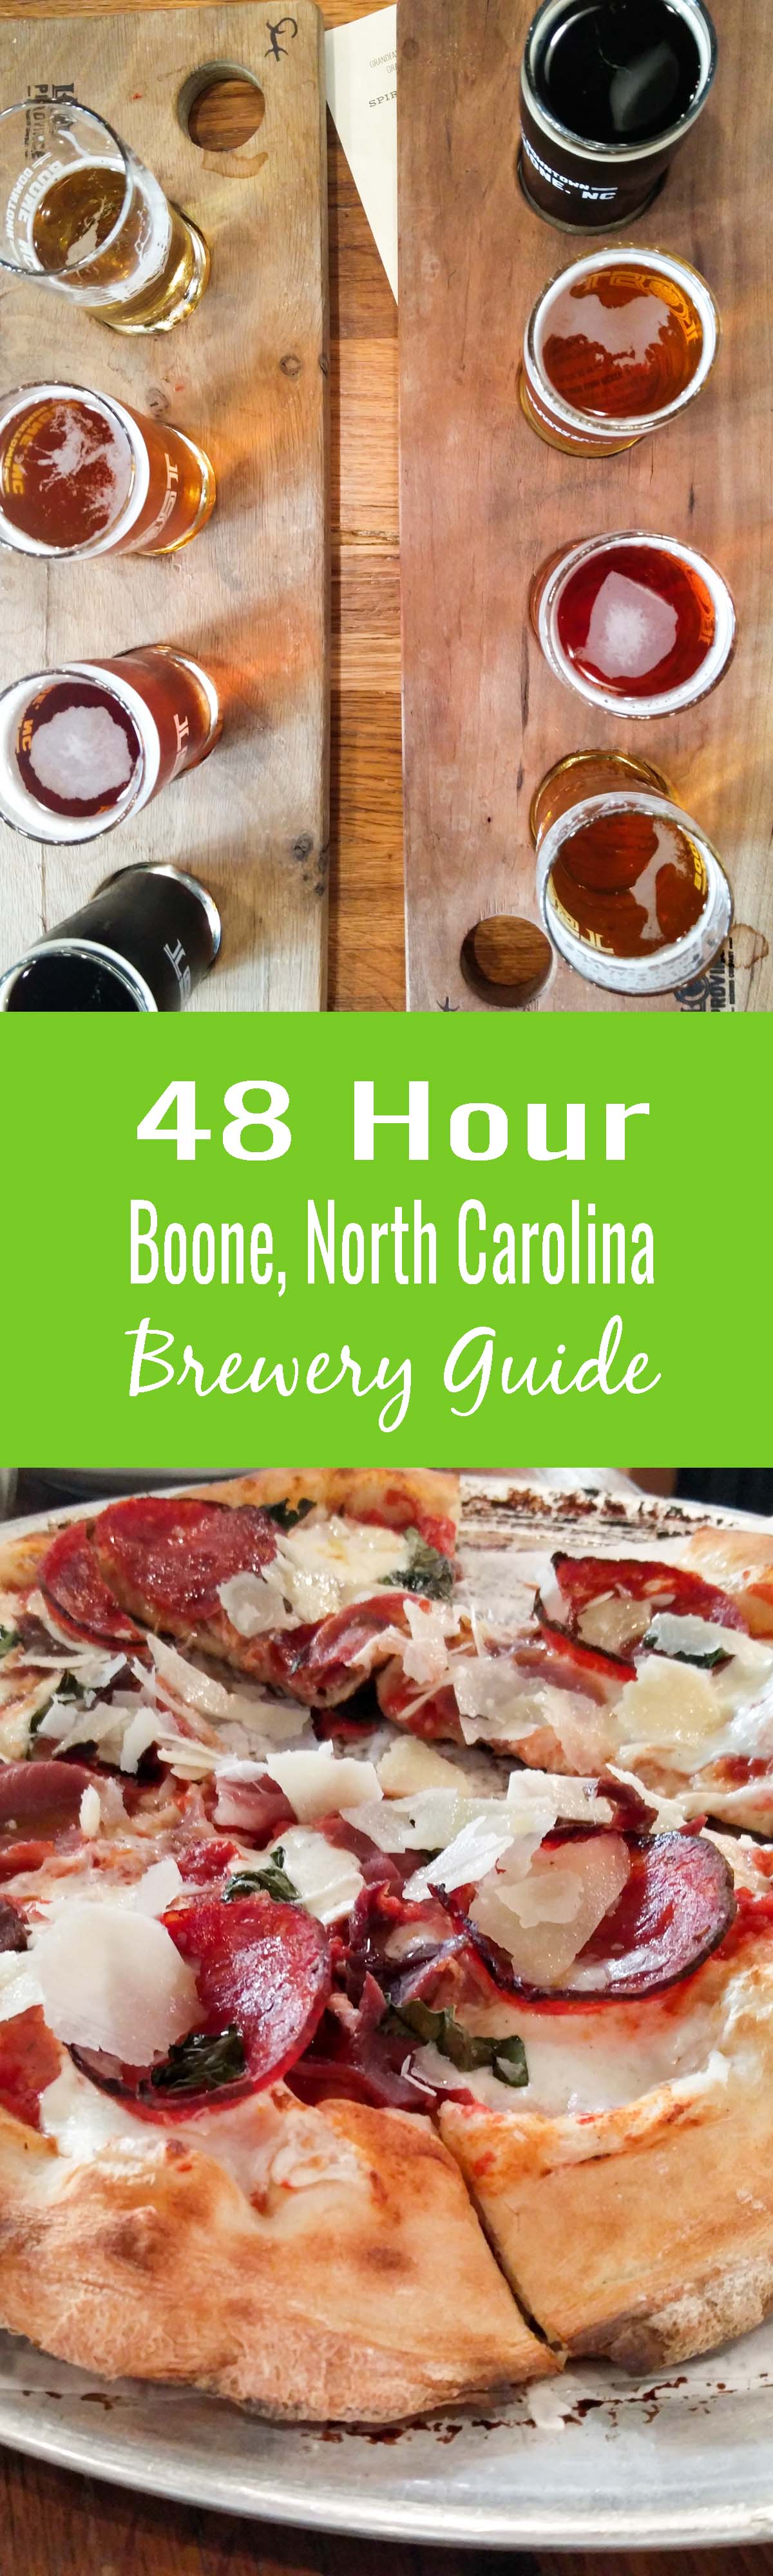 Boone, North Carolina is a great mountain alternative to Asheville. Plan your trip with my Boone Brewery Guide!